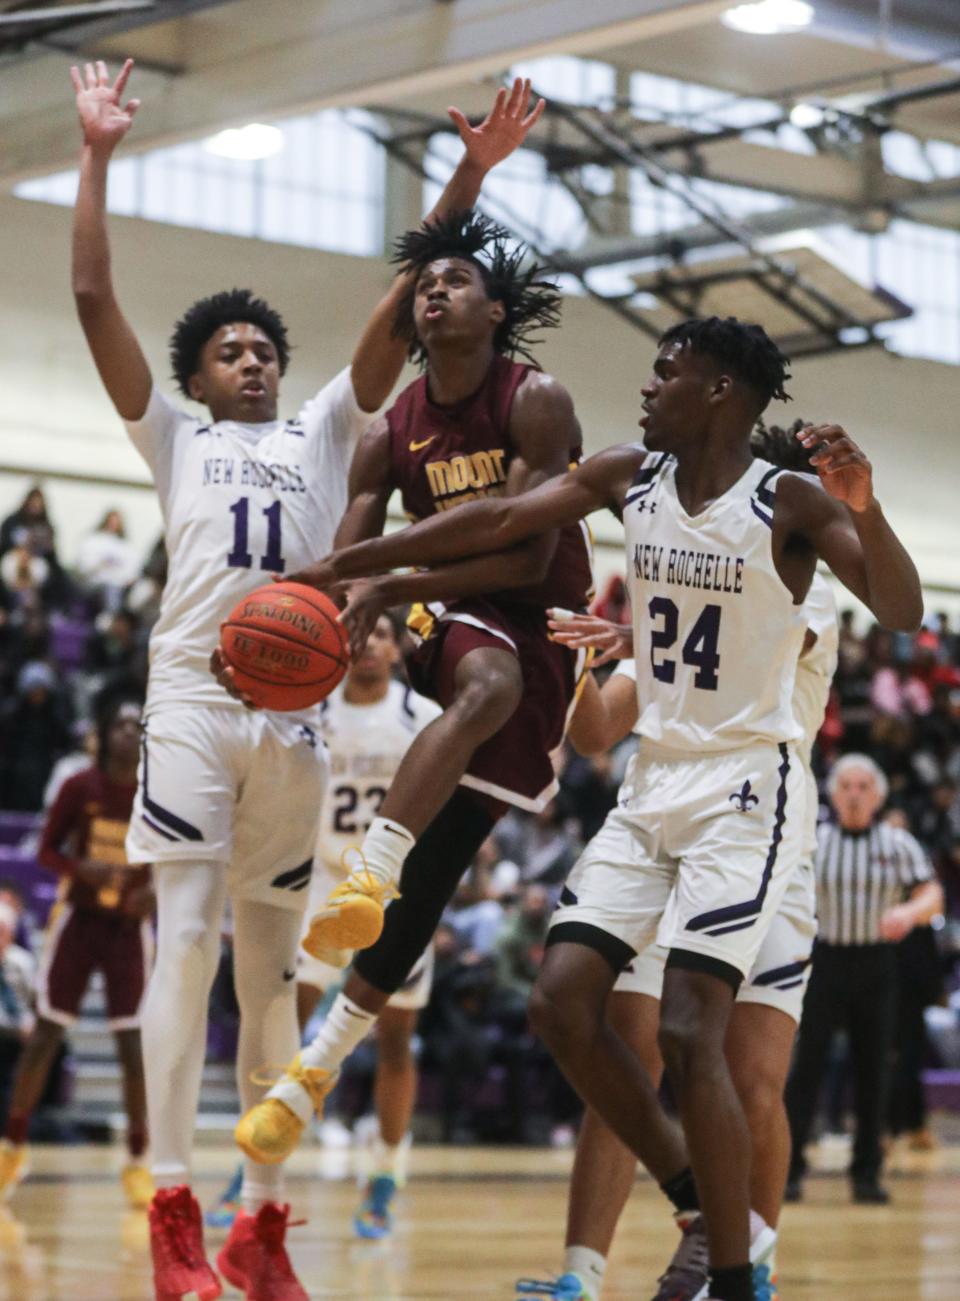 Dylan Colon of Mount Vernon drives between Malik Gasper and Darrin Greaves II Sr. of New Rochelle during a varsity basketball game at New Rochelle High School Feb. 7, 2023. Mount Vernon defeated New Rochelle 66-56.